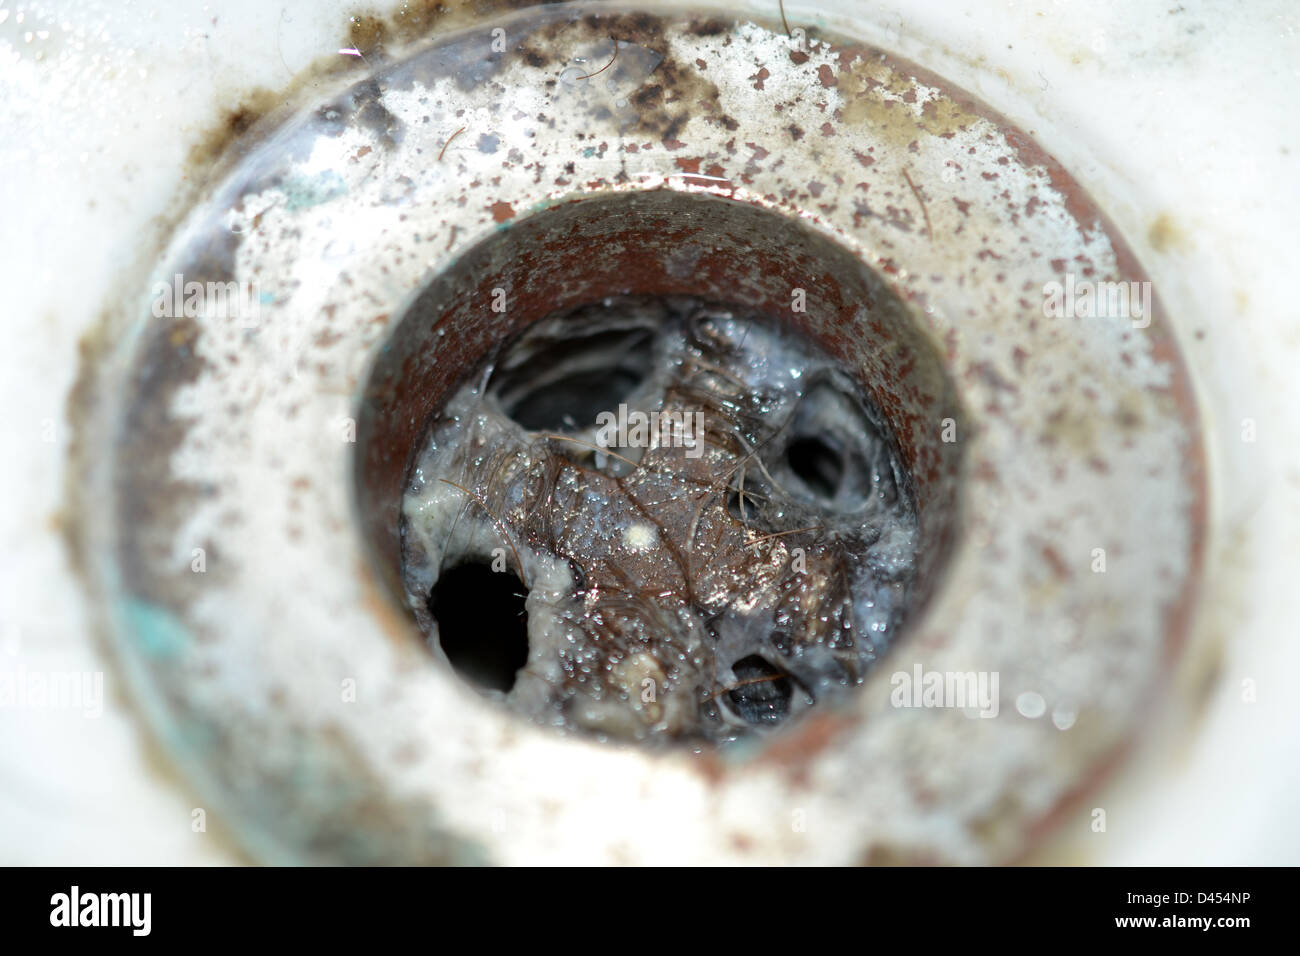 Close Up Of Clogged Bathroom Sink Drain Full Of Hair And